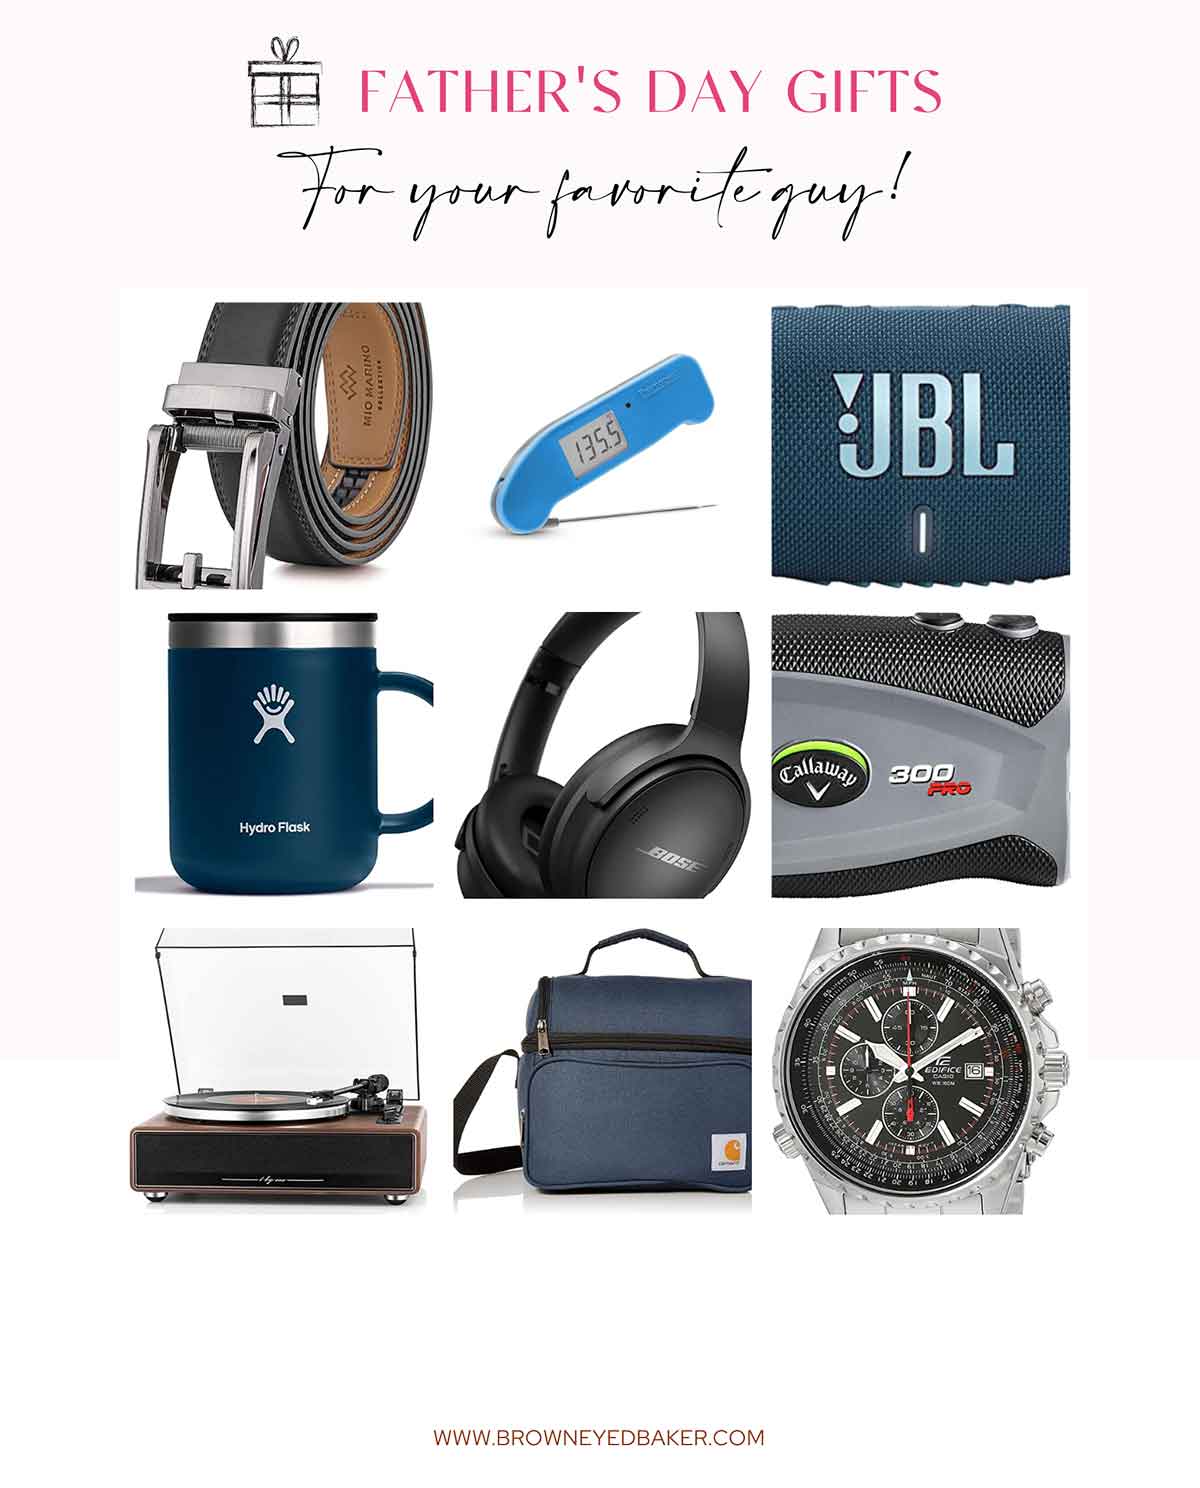 Text "Father's Day Gifts for your favorite guy" with collage of nine images.